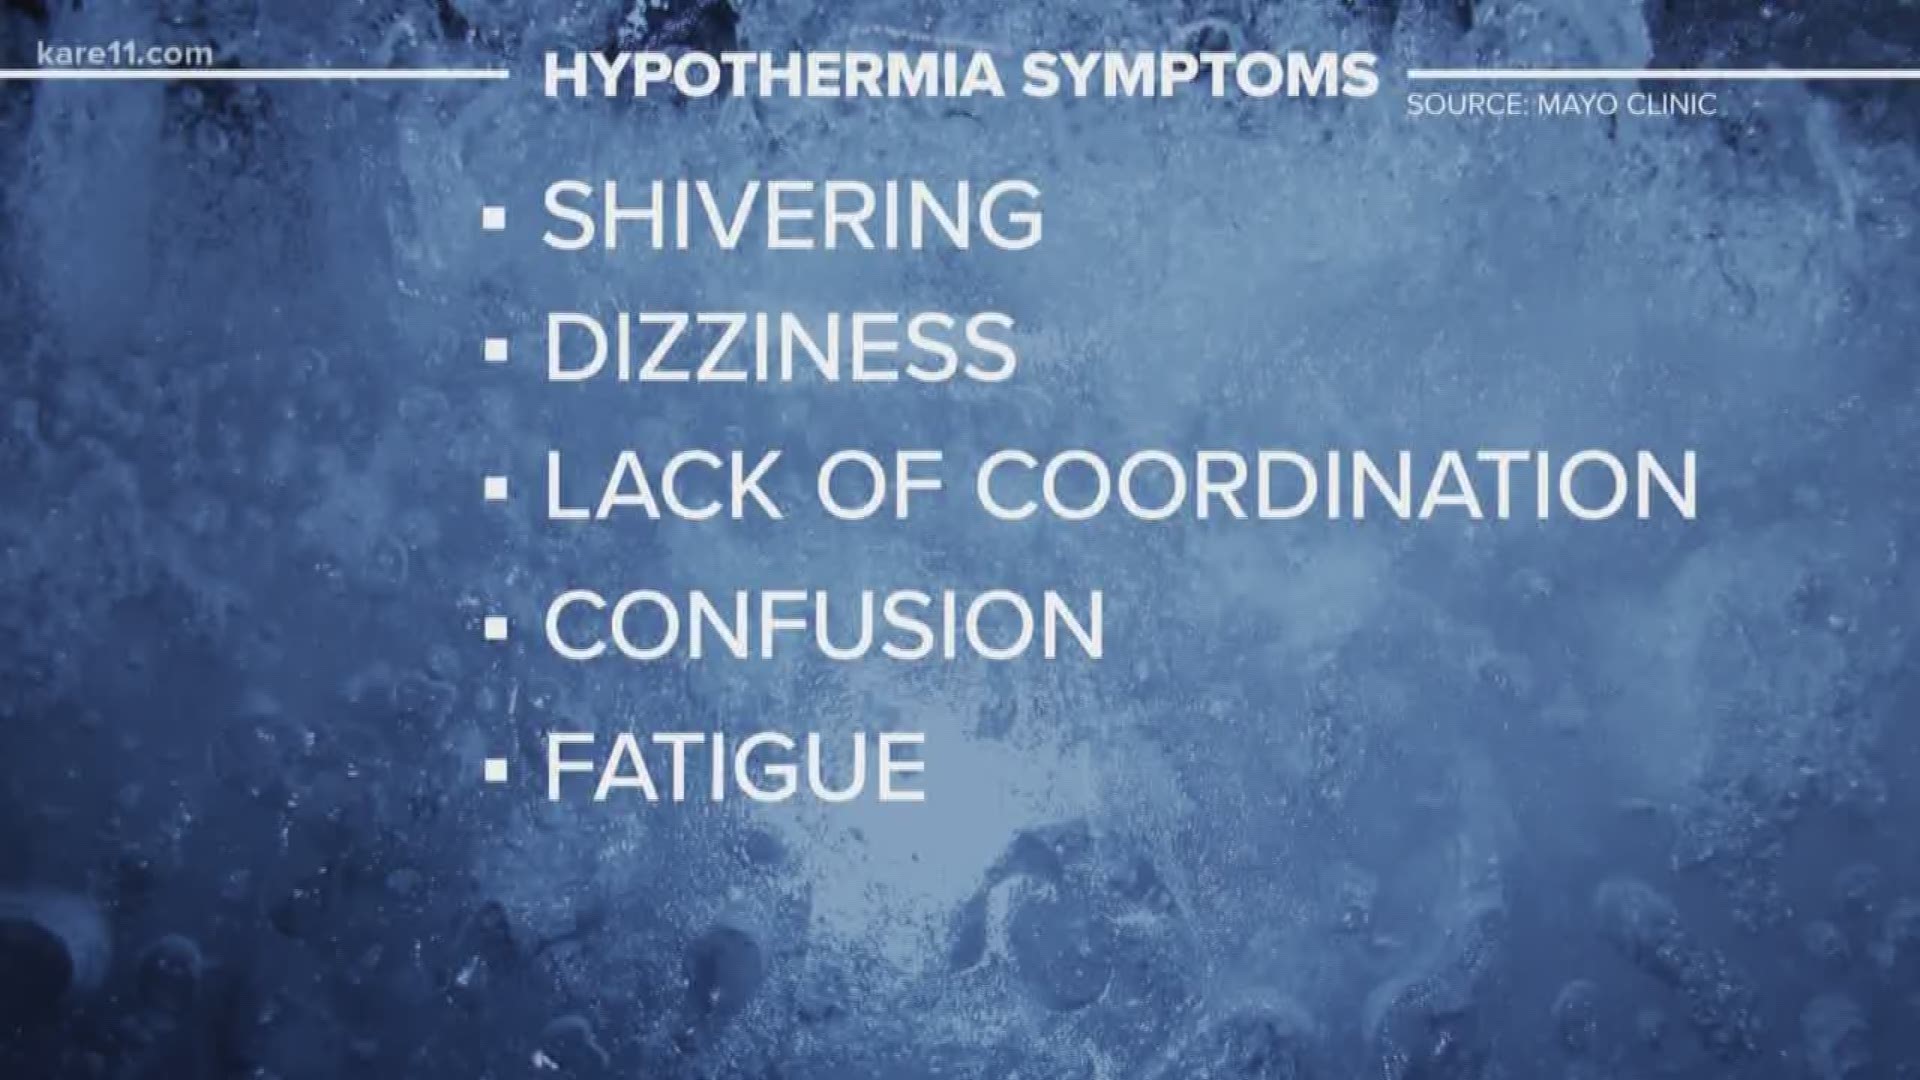 With a deep freeze on the way later this week it's important to know and recognize the symptoms of Hypothermia.